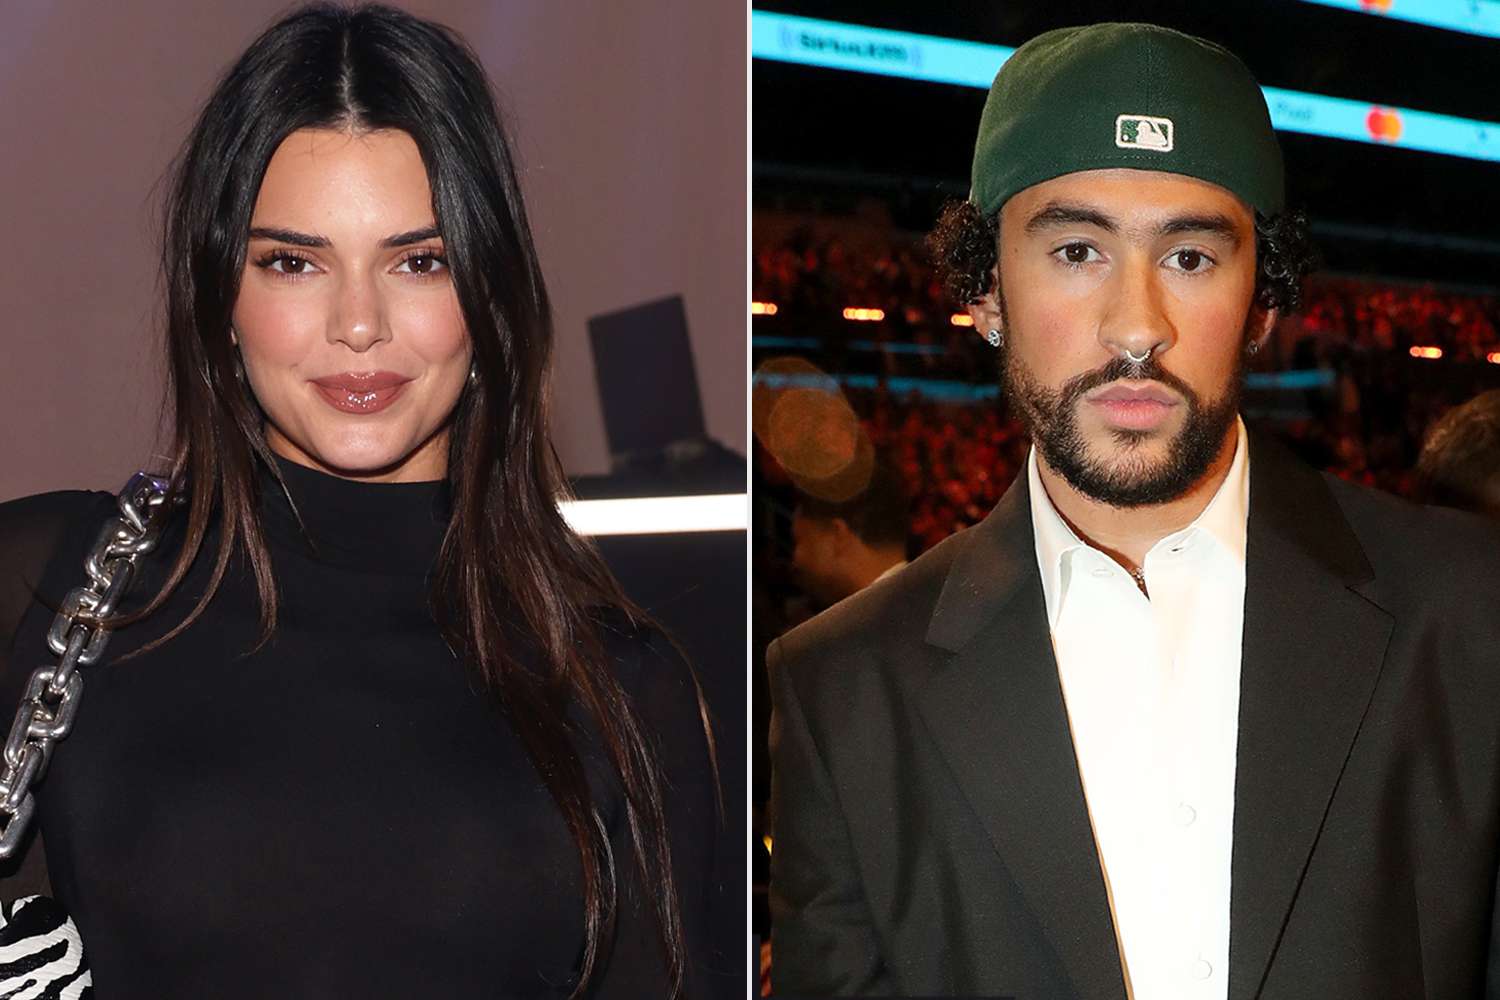 Kendall Jenner Spotted at Ex Bad Bunny’s Concert in Orlando amid Romance Reconciliation Rumors